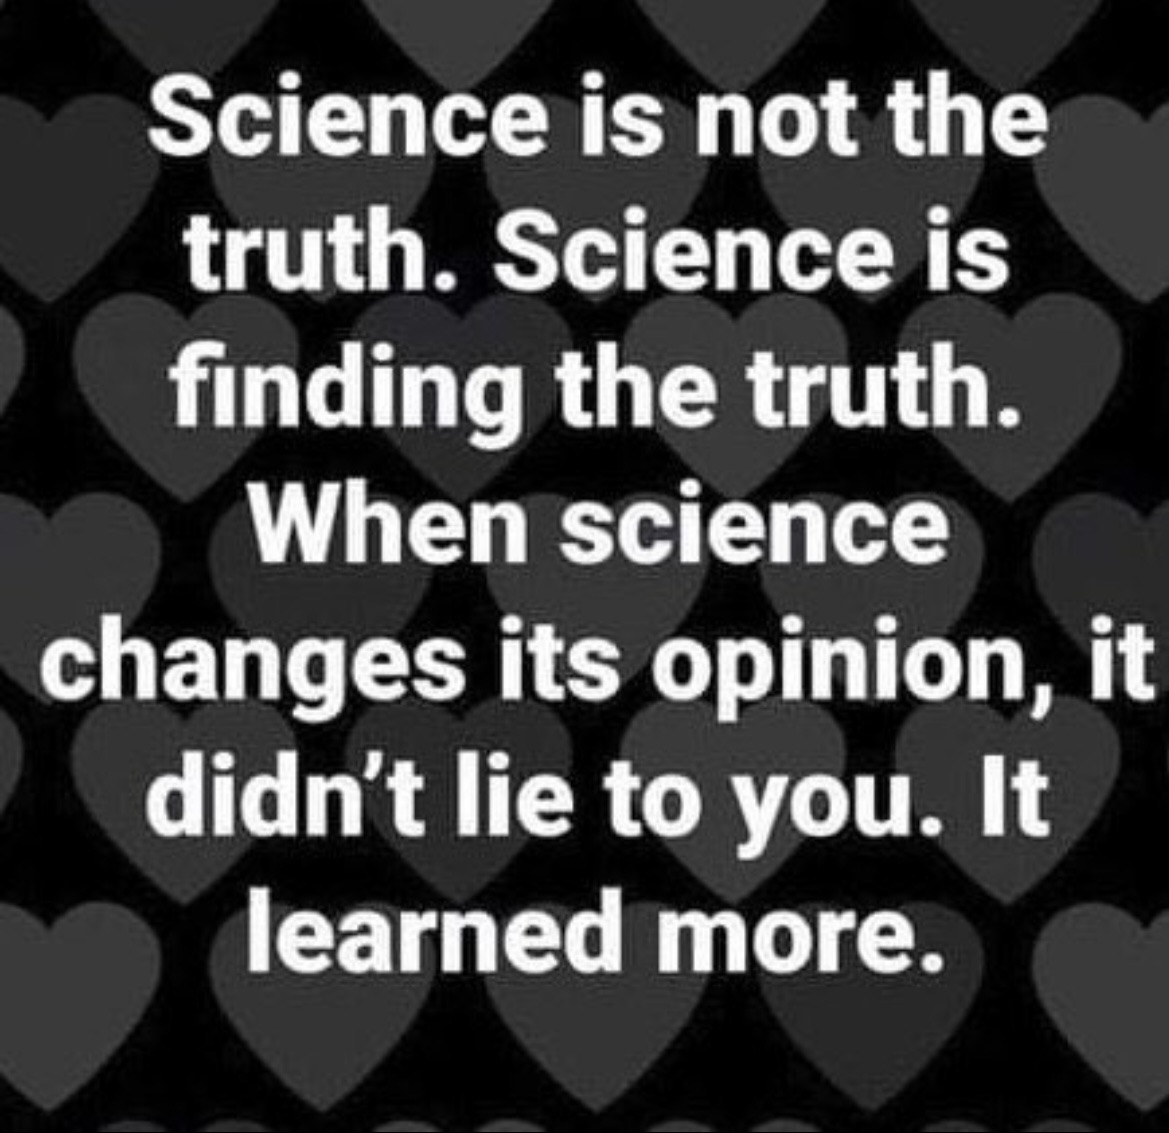 Someone posted this on my feed, and it’s a good reminder for those who balk when the messaging changes or evolves during the study of a new virus. Science is the only tool we have, and it’s doing its best.